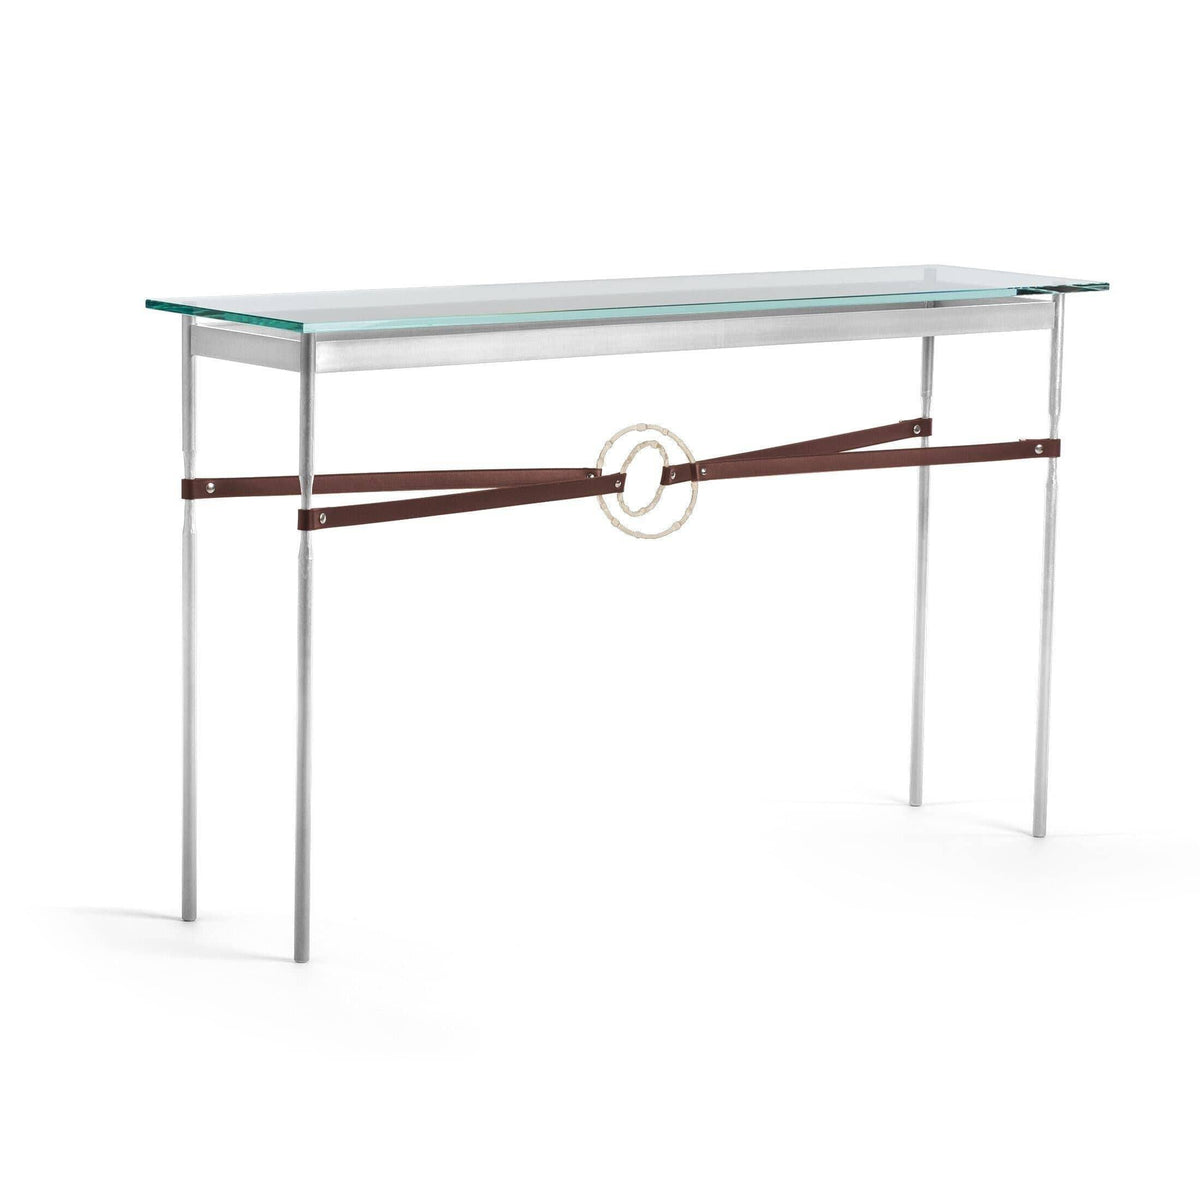 Hubbardton Forge - Equus Brown Leather Console Table - 750118-85-84-LB-VA0714 | Montreal Lighting & Hardware